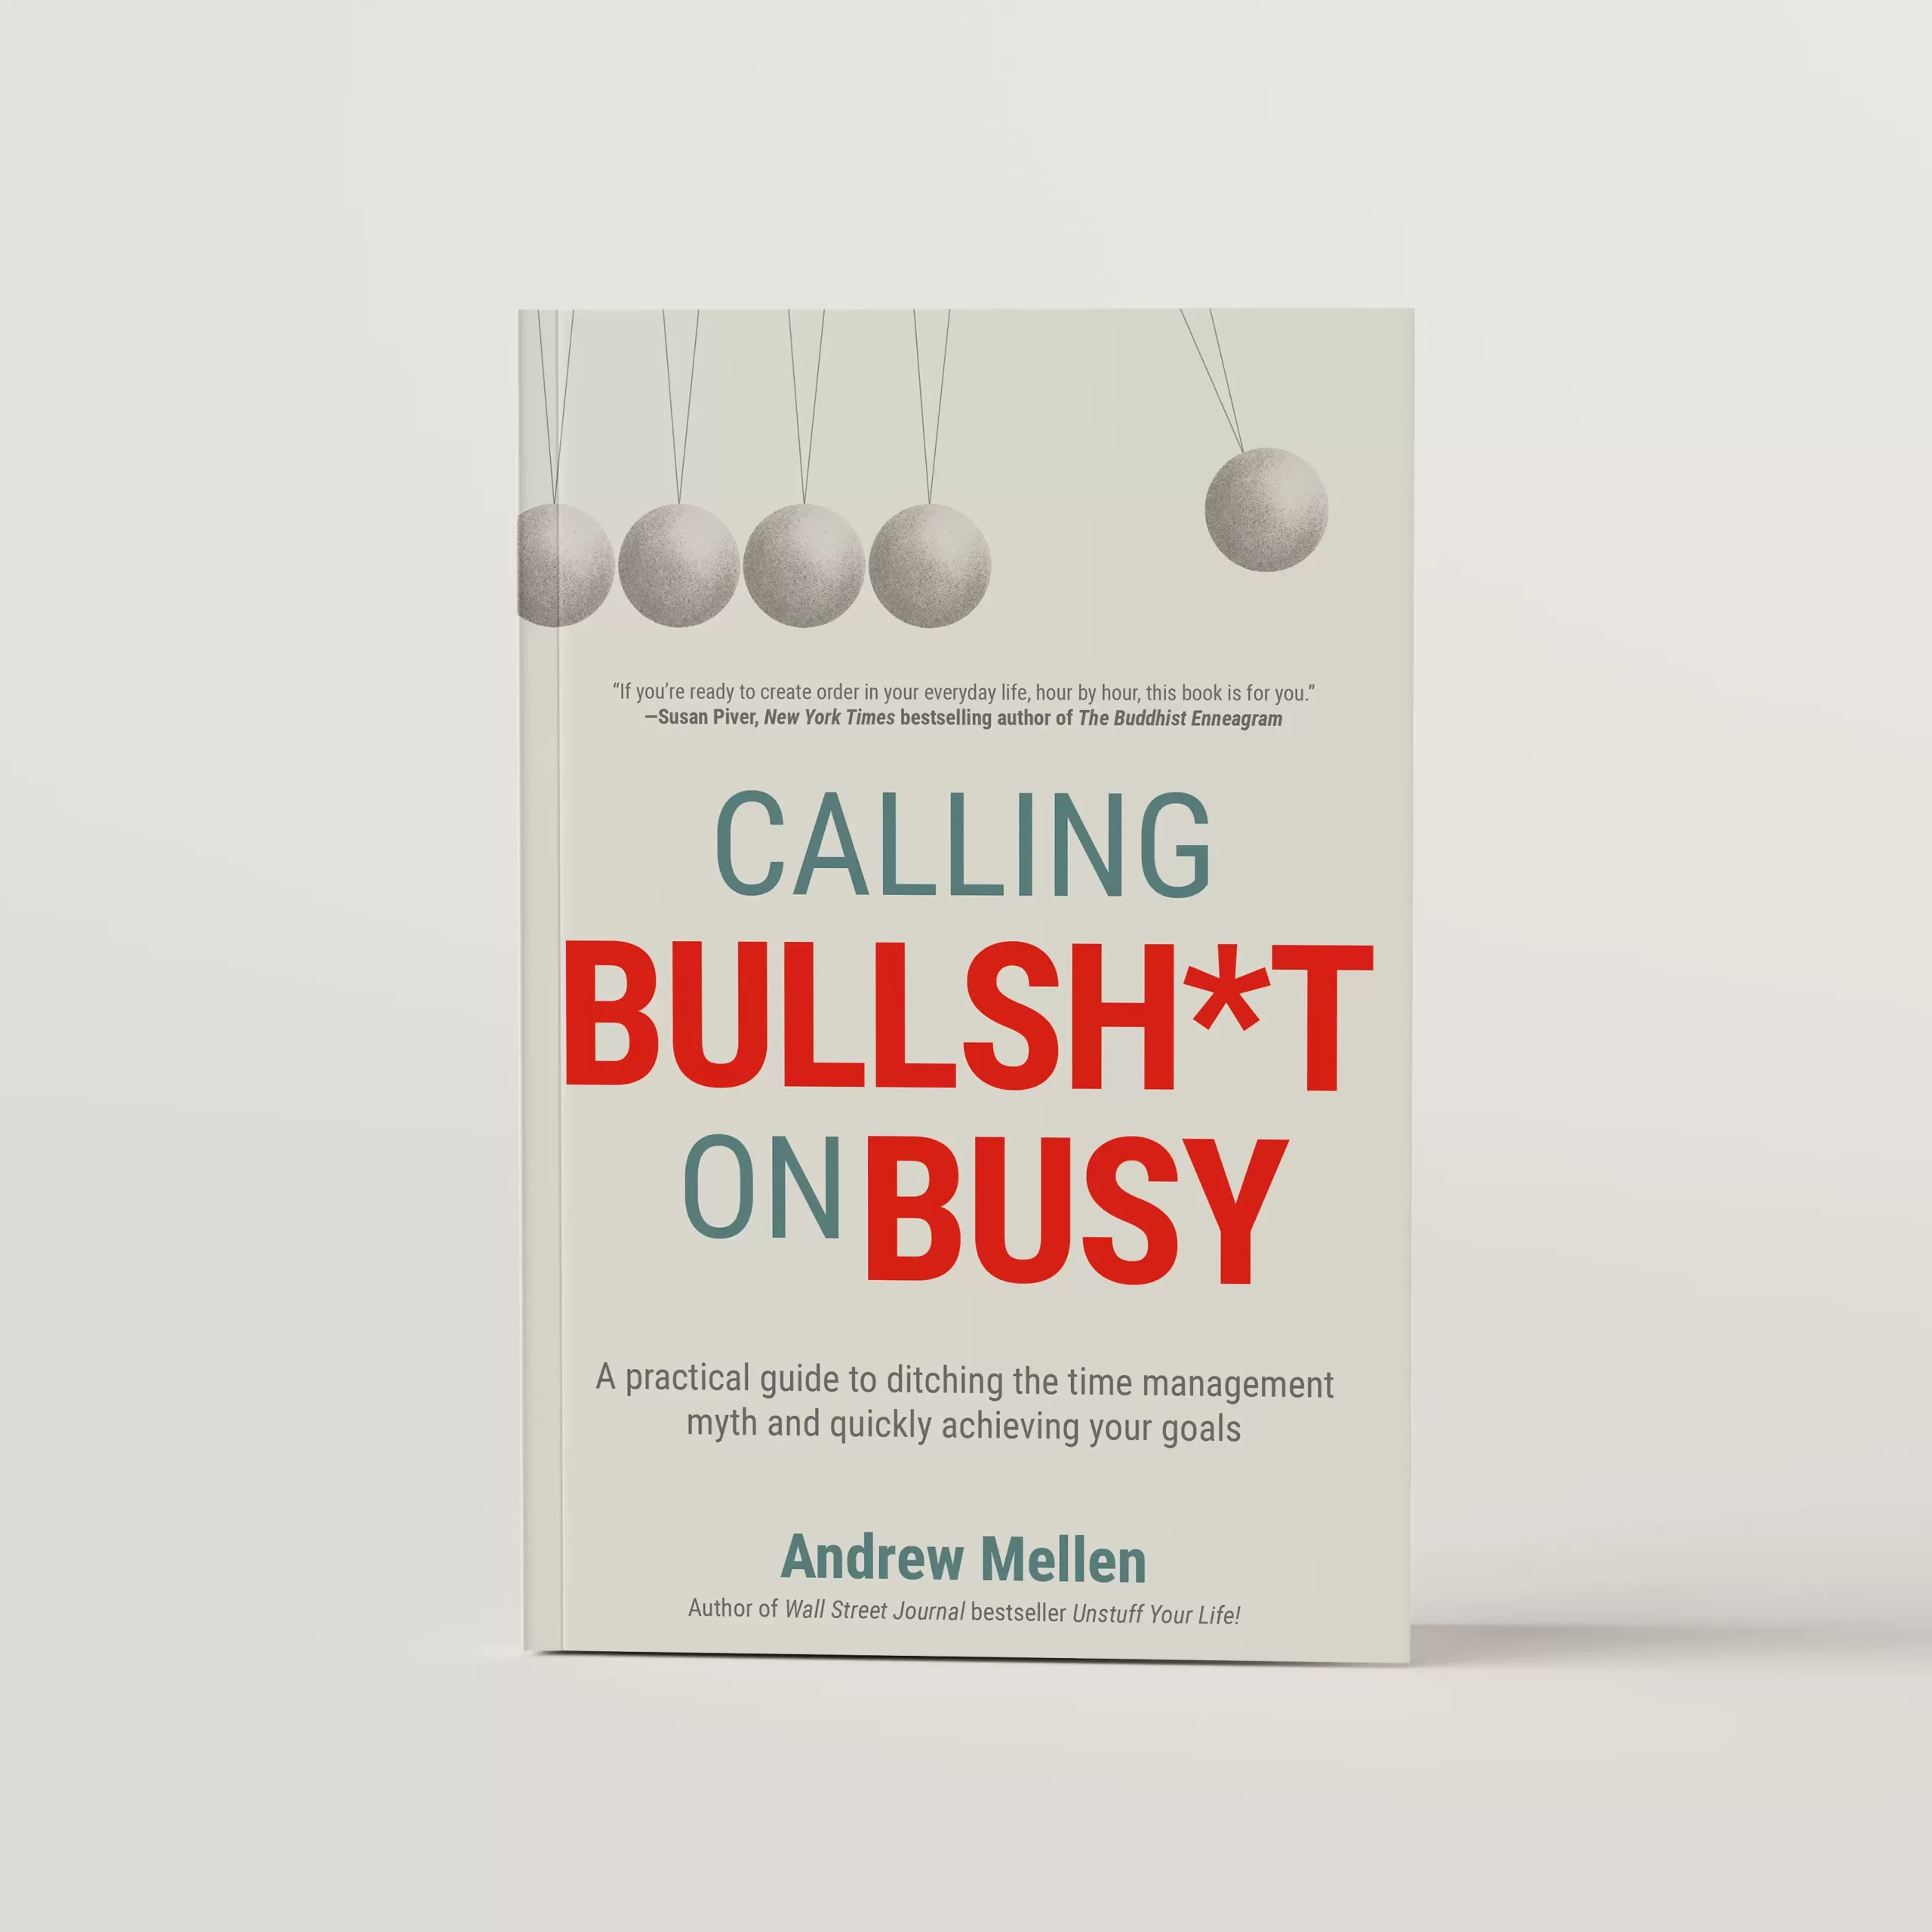 Book cover design for Calling Bullshit on Busy featuring a stylized drawing of Newton's Cradle.